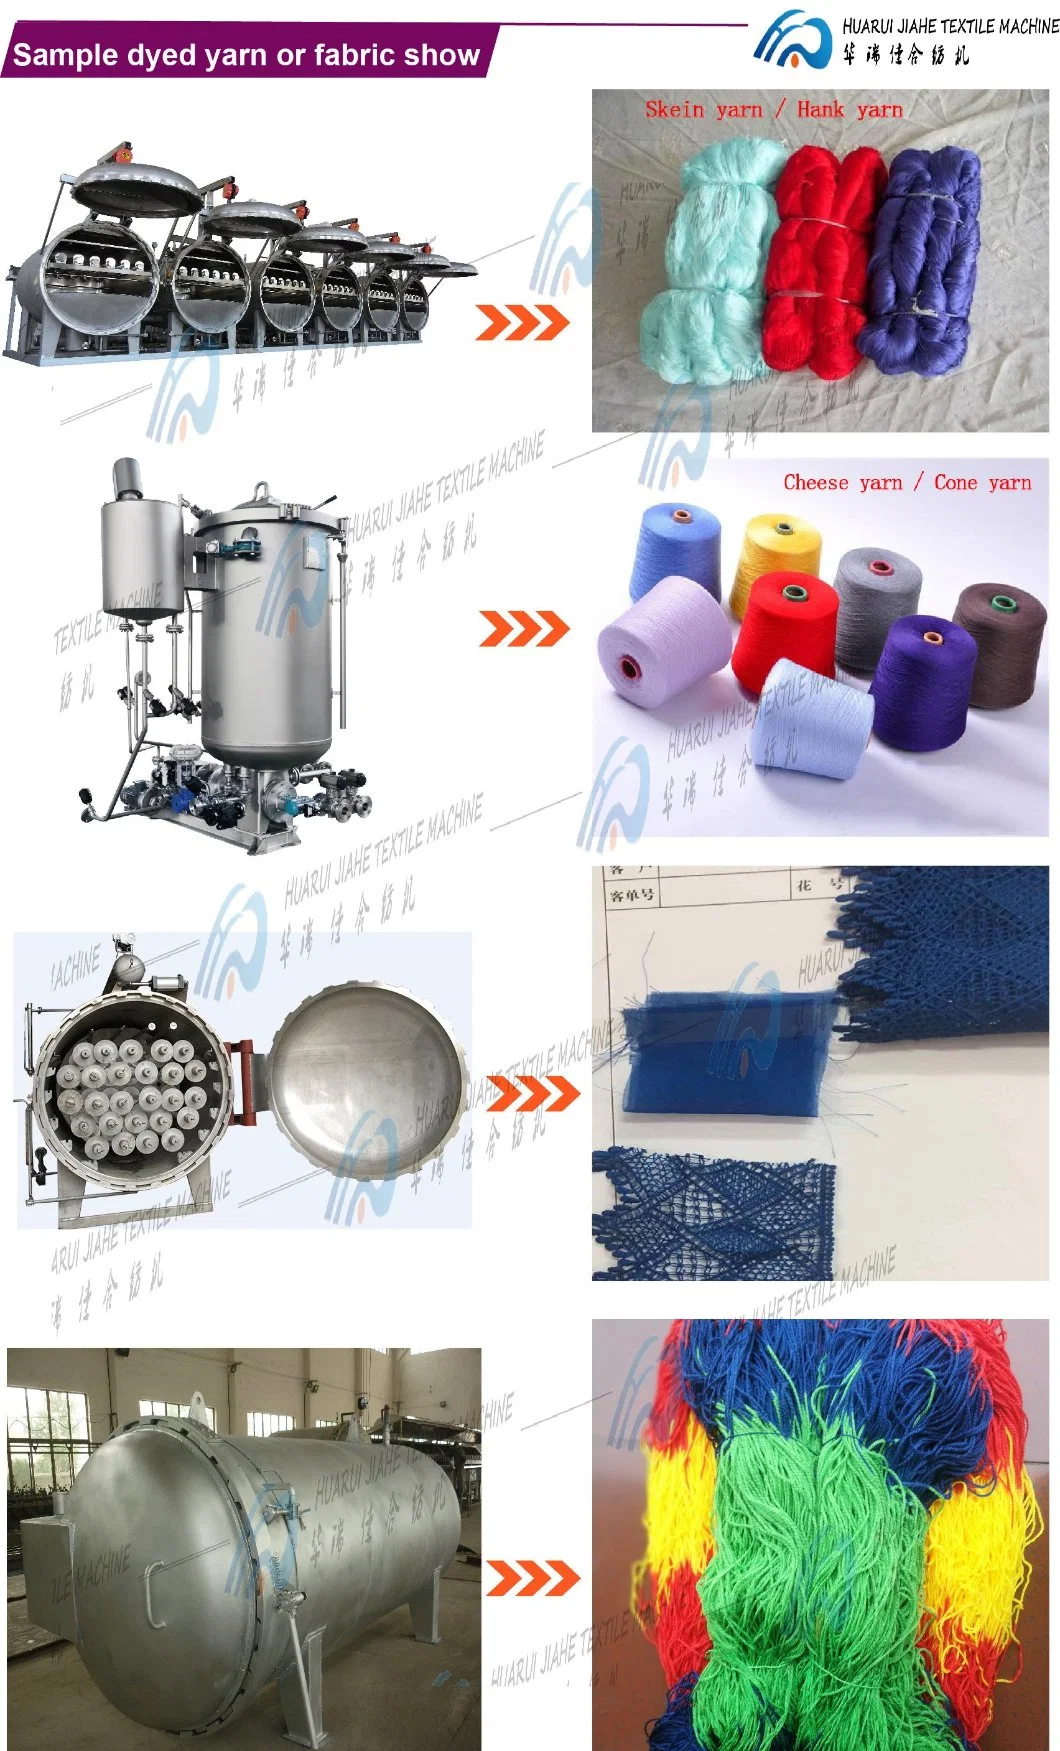 Top Quality Textile Dyeing Machine of China National Standard Yarn Cone Dyeing Machine China Cheap Fabric and Textile of Ce Standard Normal Temperature Dye